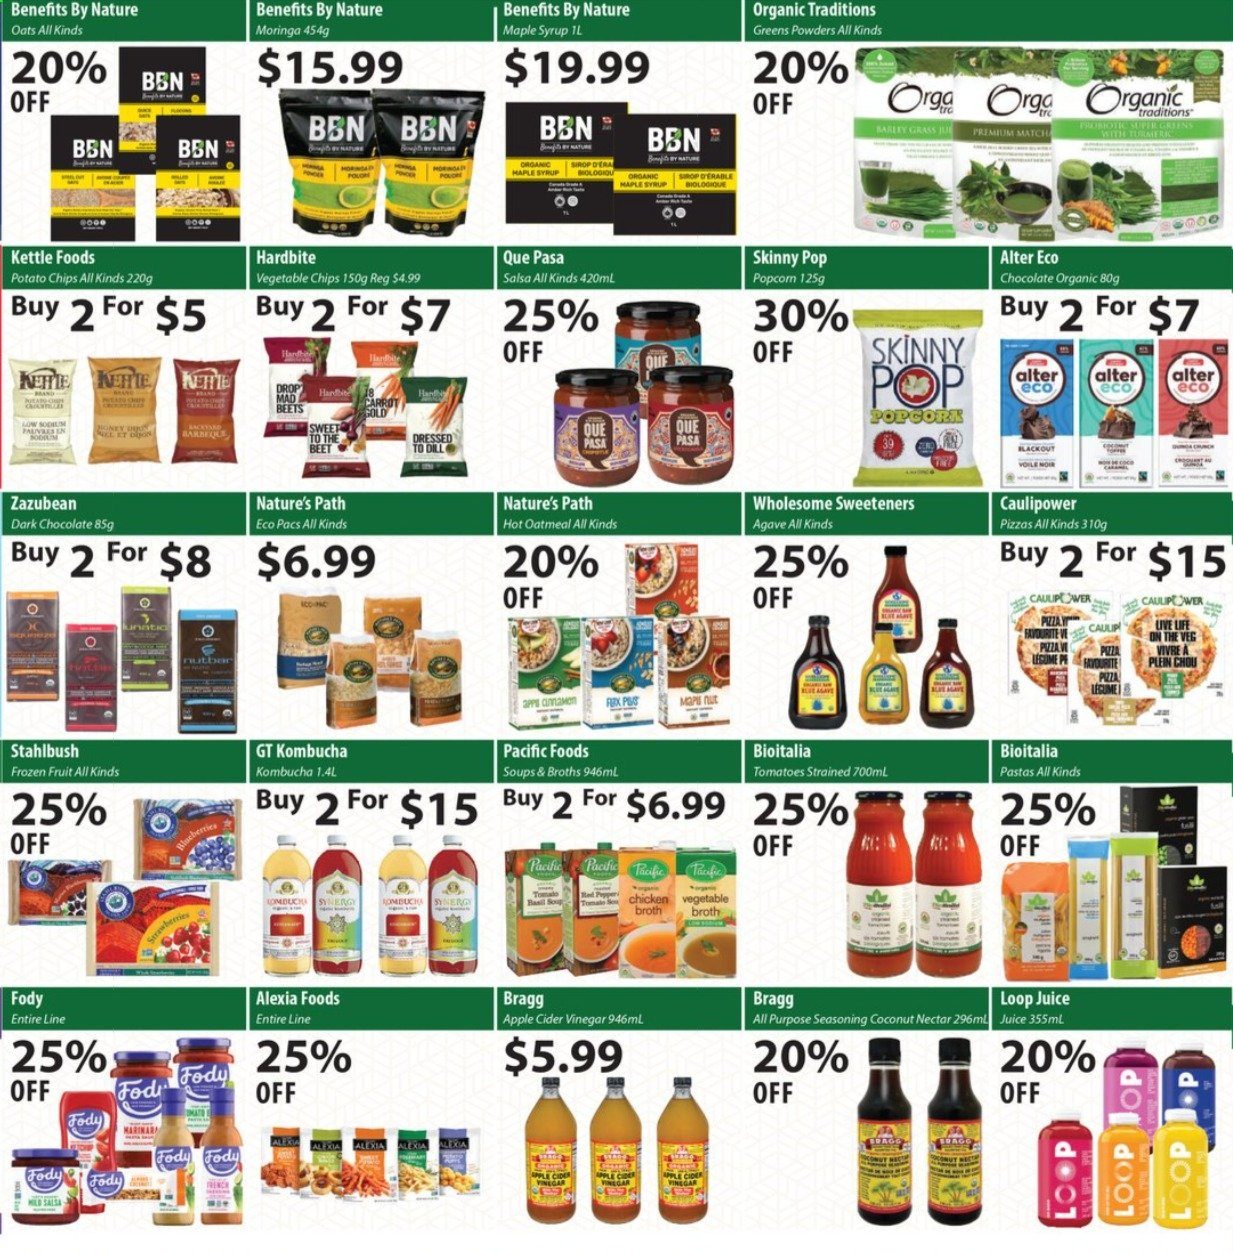 thumbnail - Healthy Planet Flyer - January 14, 2021 - February 10, 2021 - Sales products - chocolate, dark chocolate, potato chips, vegetable chips, Skinny Pop, oatmeal, oats, broth, dill, turmeric, spice, salsa, apple cider vinegar, maple syrup, syrup, juice, kombucha, Moringa. Page 5.